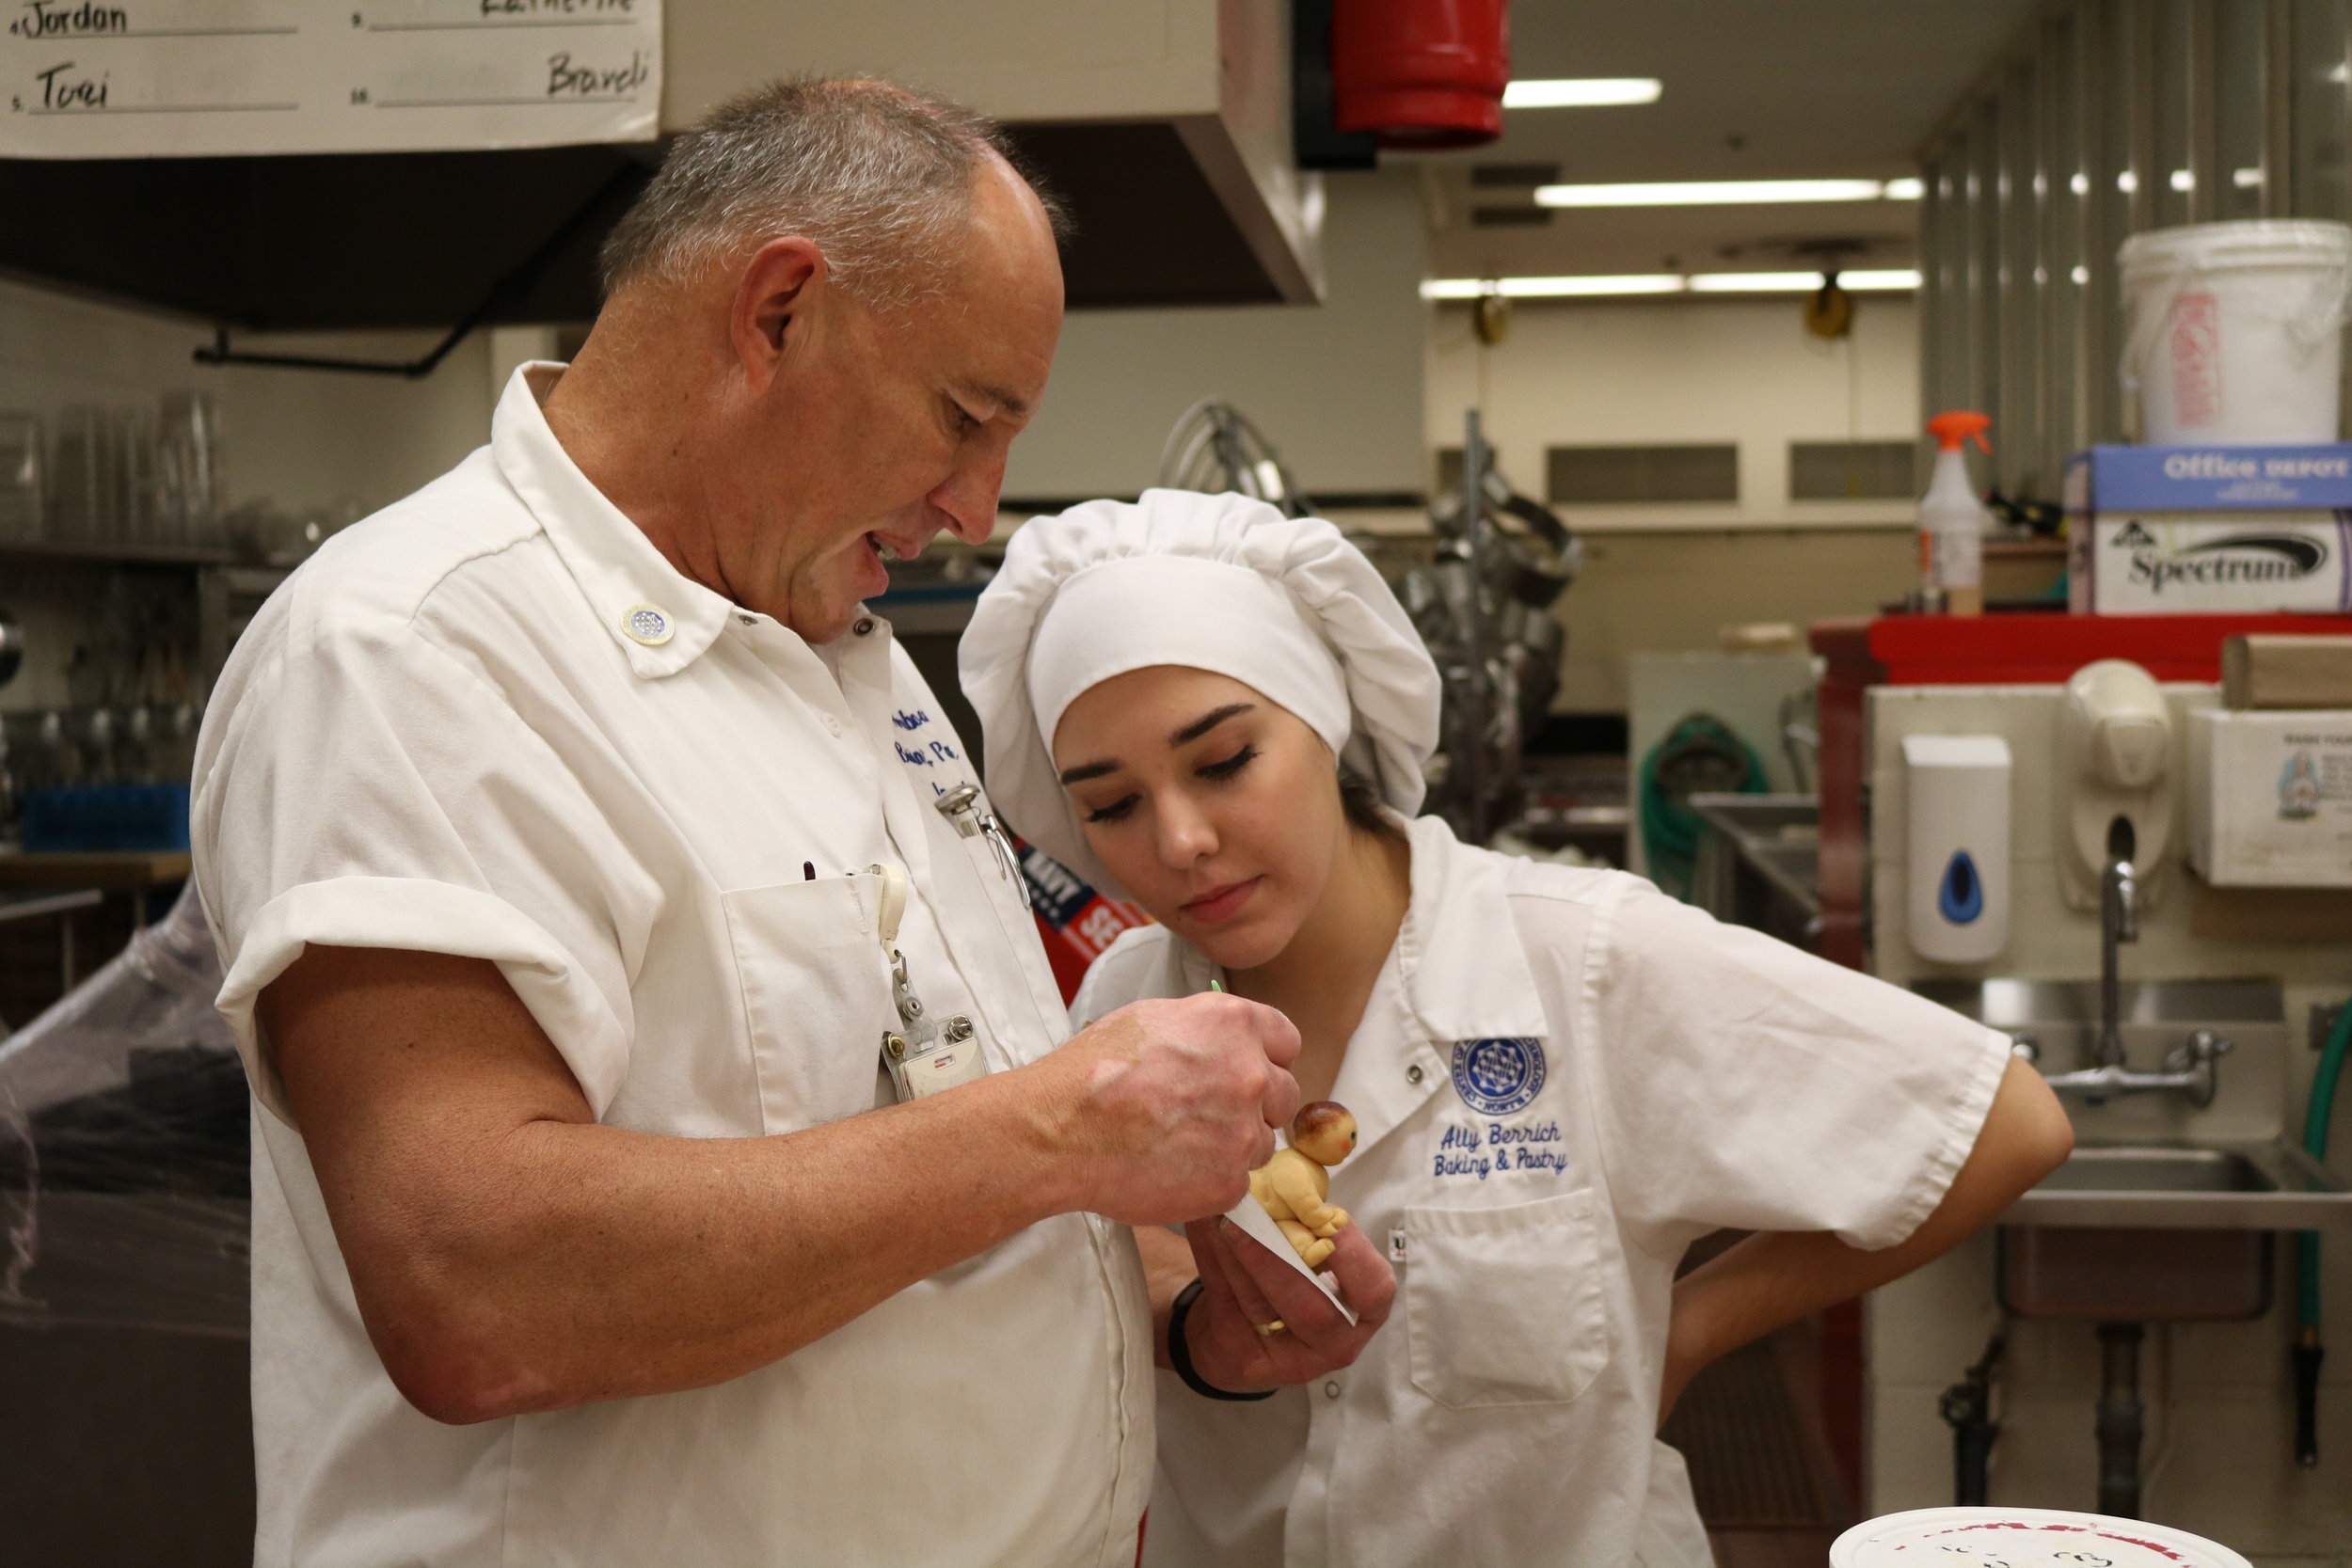   Peter Akerboom, left, a baking and pastry instructor, teaches Ally Berrich a technique for using marzipan in a course at the Center of Applied Technology North in Severn, Md., on May 11, 2016.  